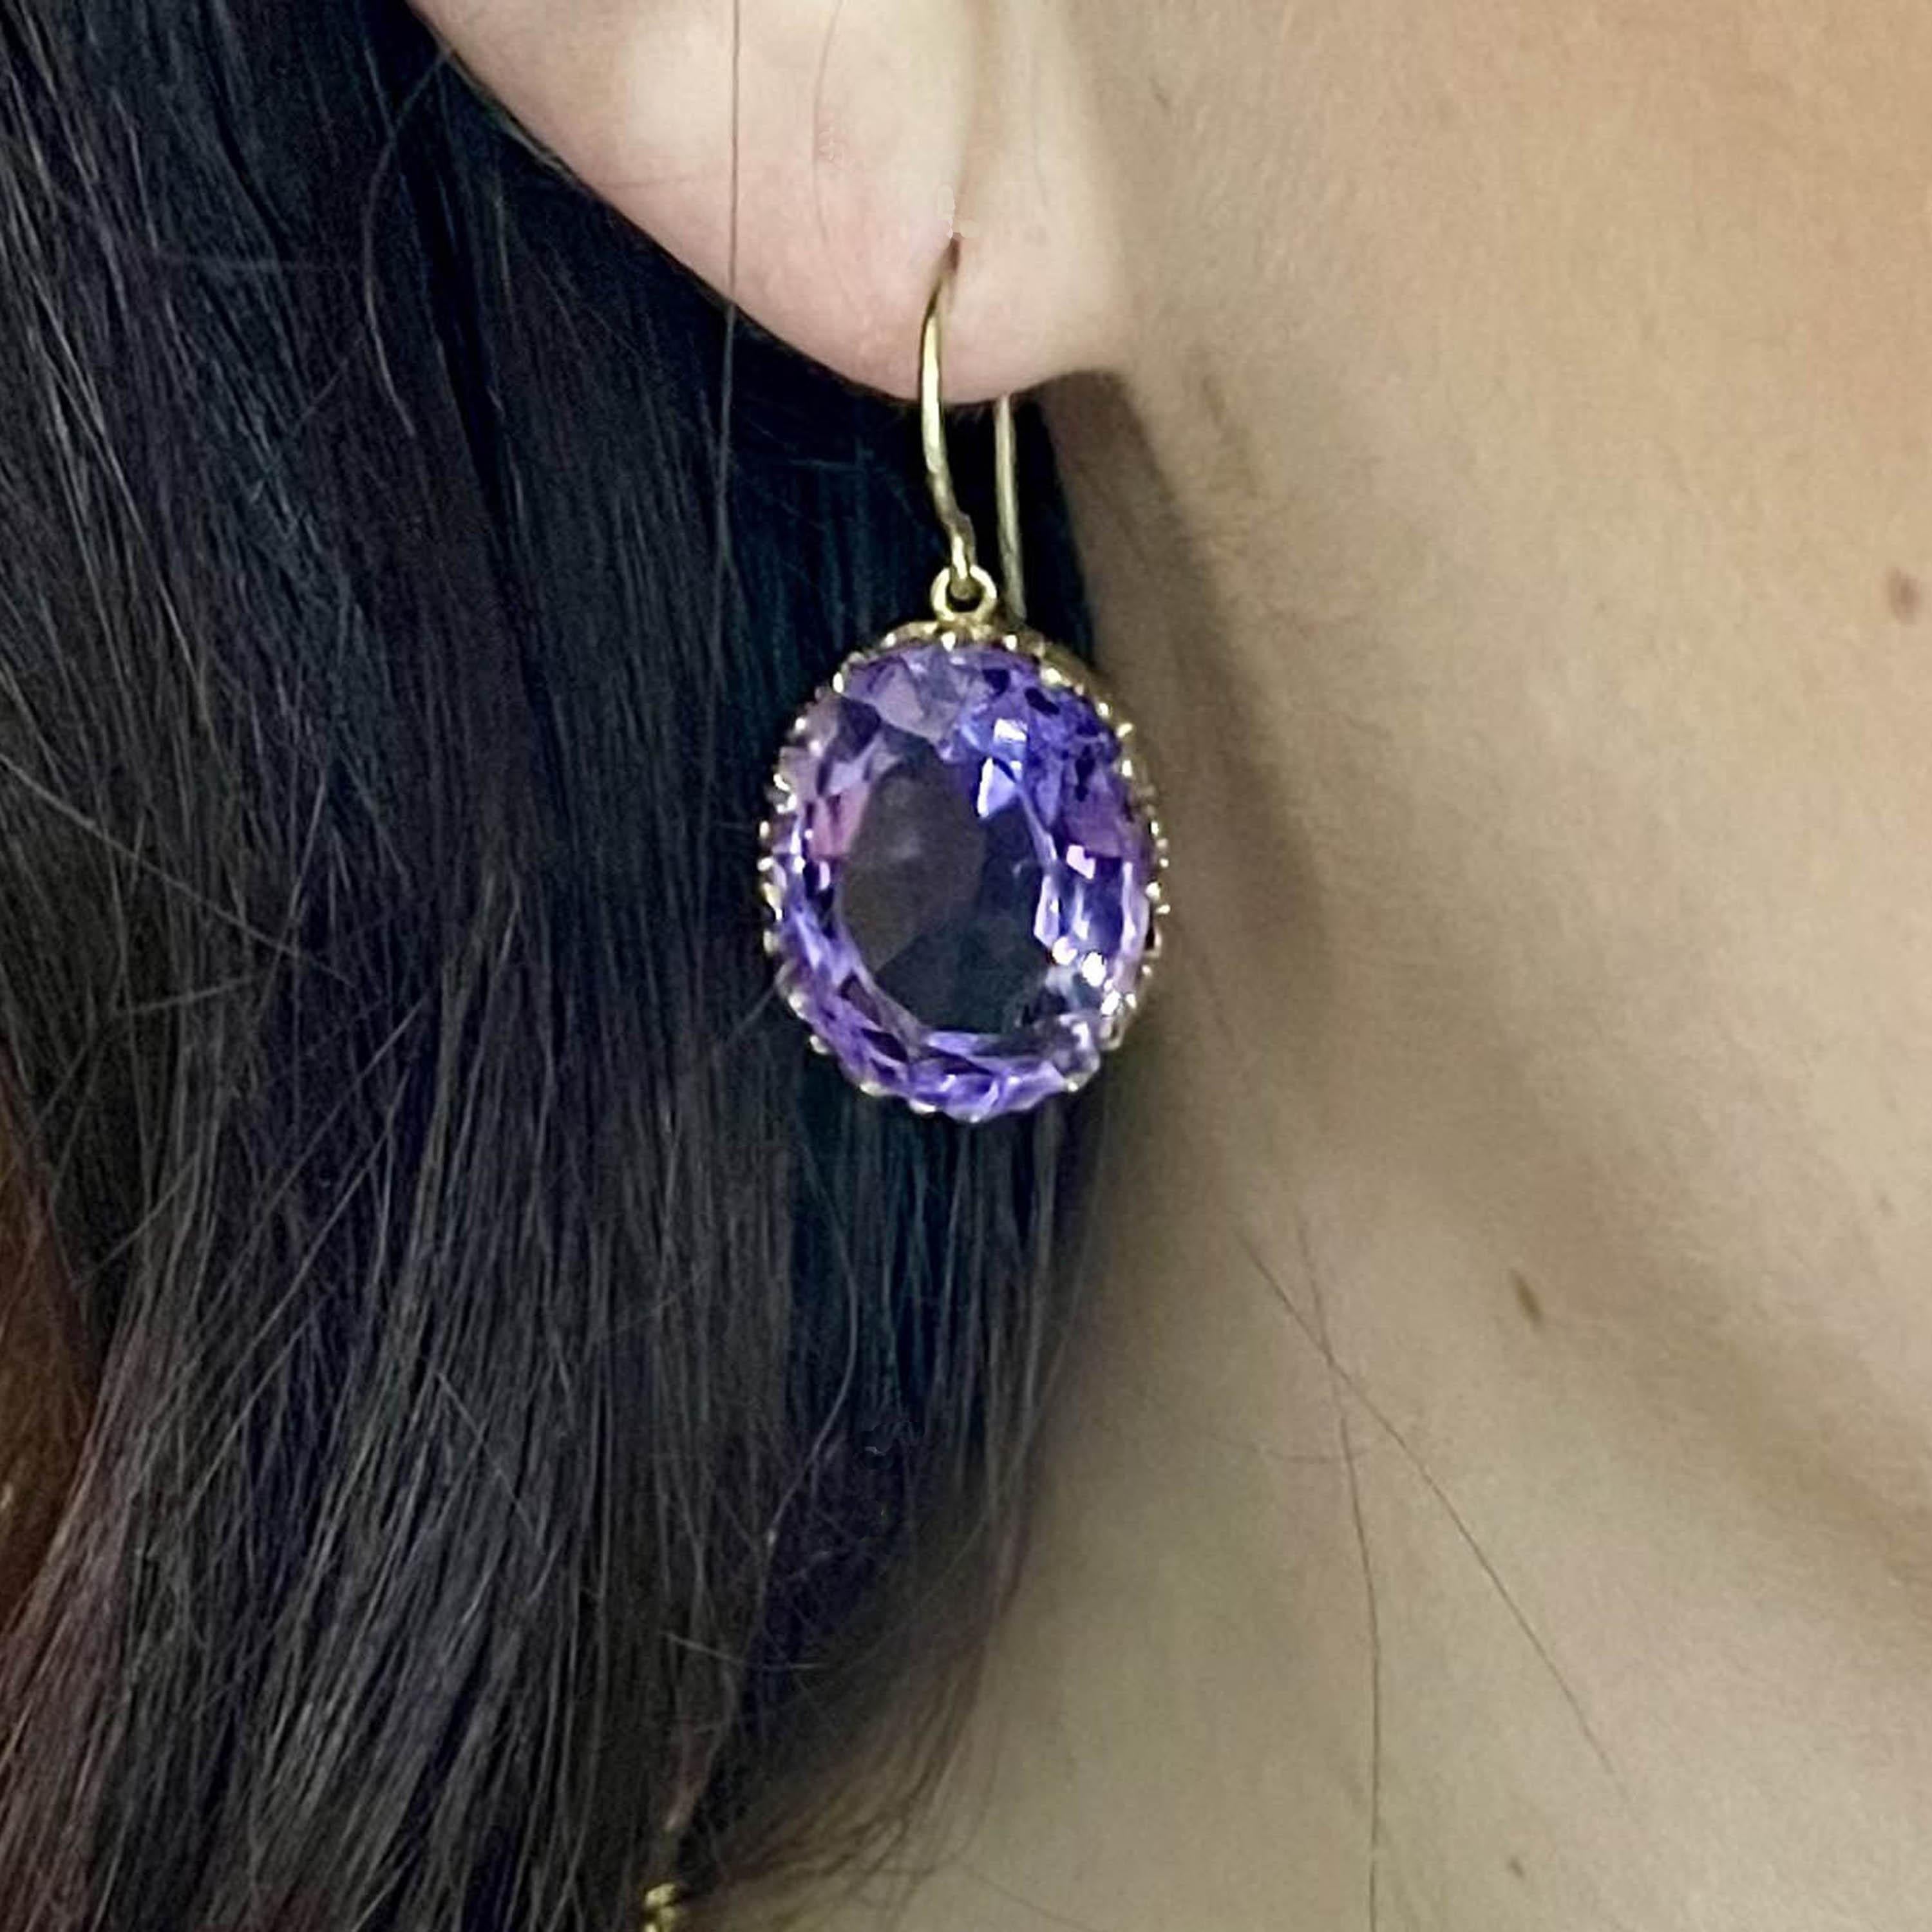 A pair of antique, amethyst and gold, drop earrings, with large, oval faceted amethysts, in open backed decorative, trefoil design, gallery strip bezel settings, on gold wires, circa 1880. Estimated total weight of amethysts 33.88 carats.

Some of